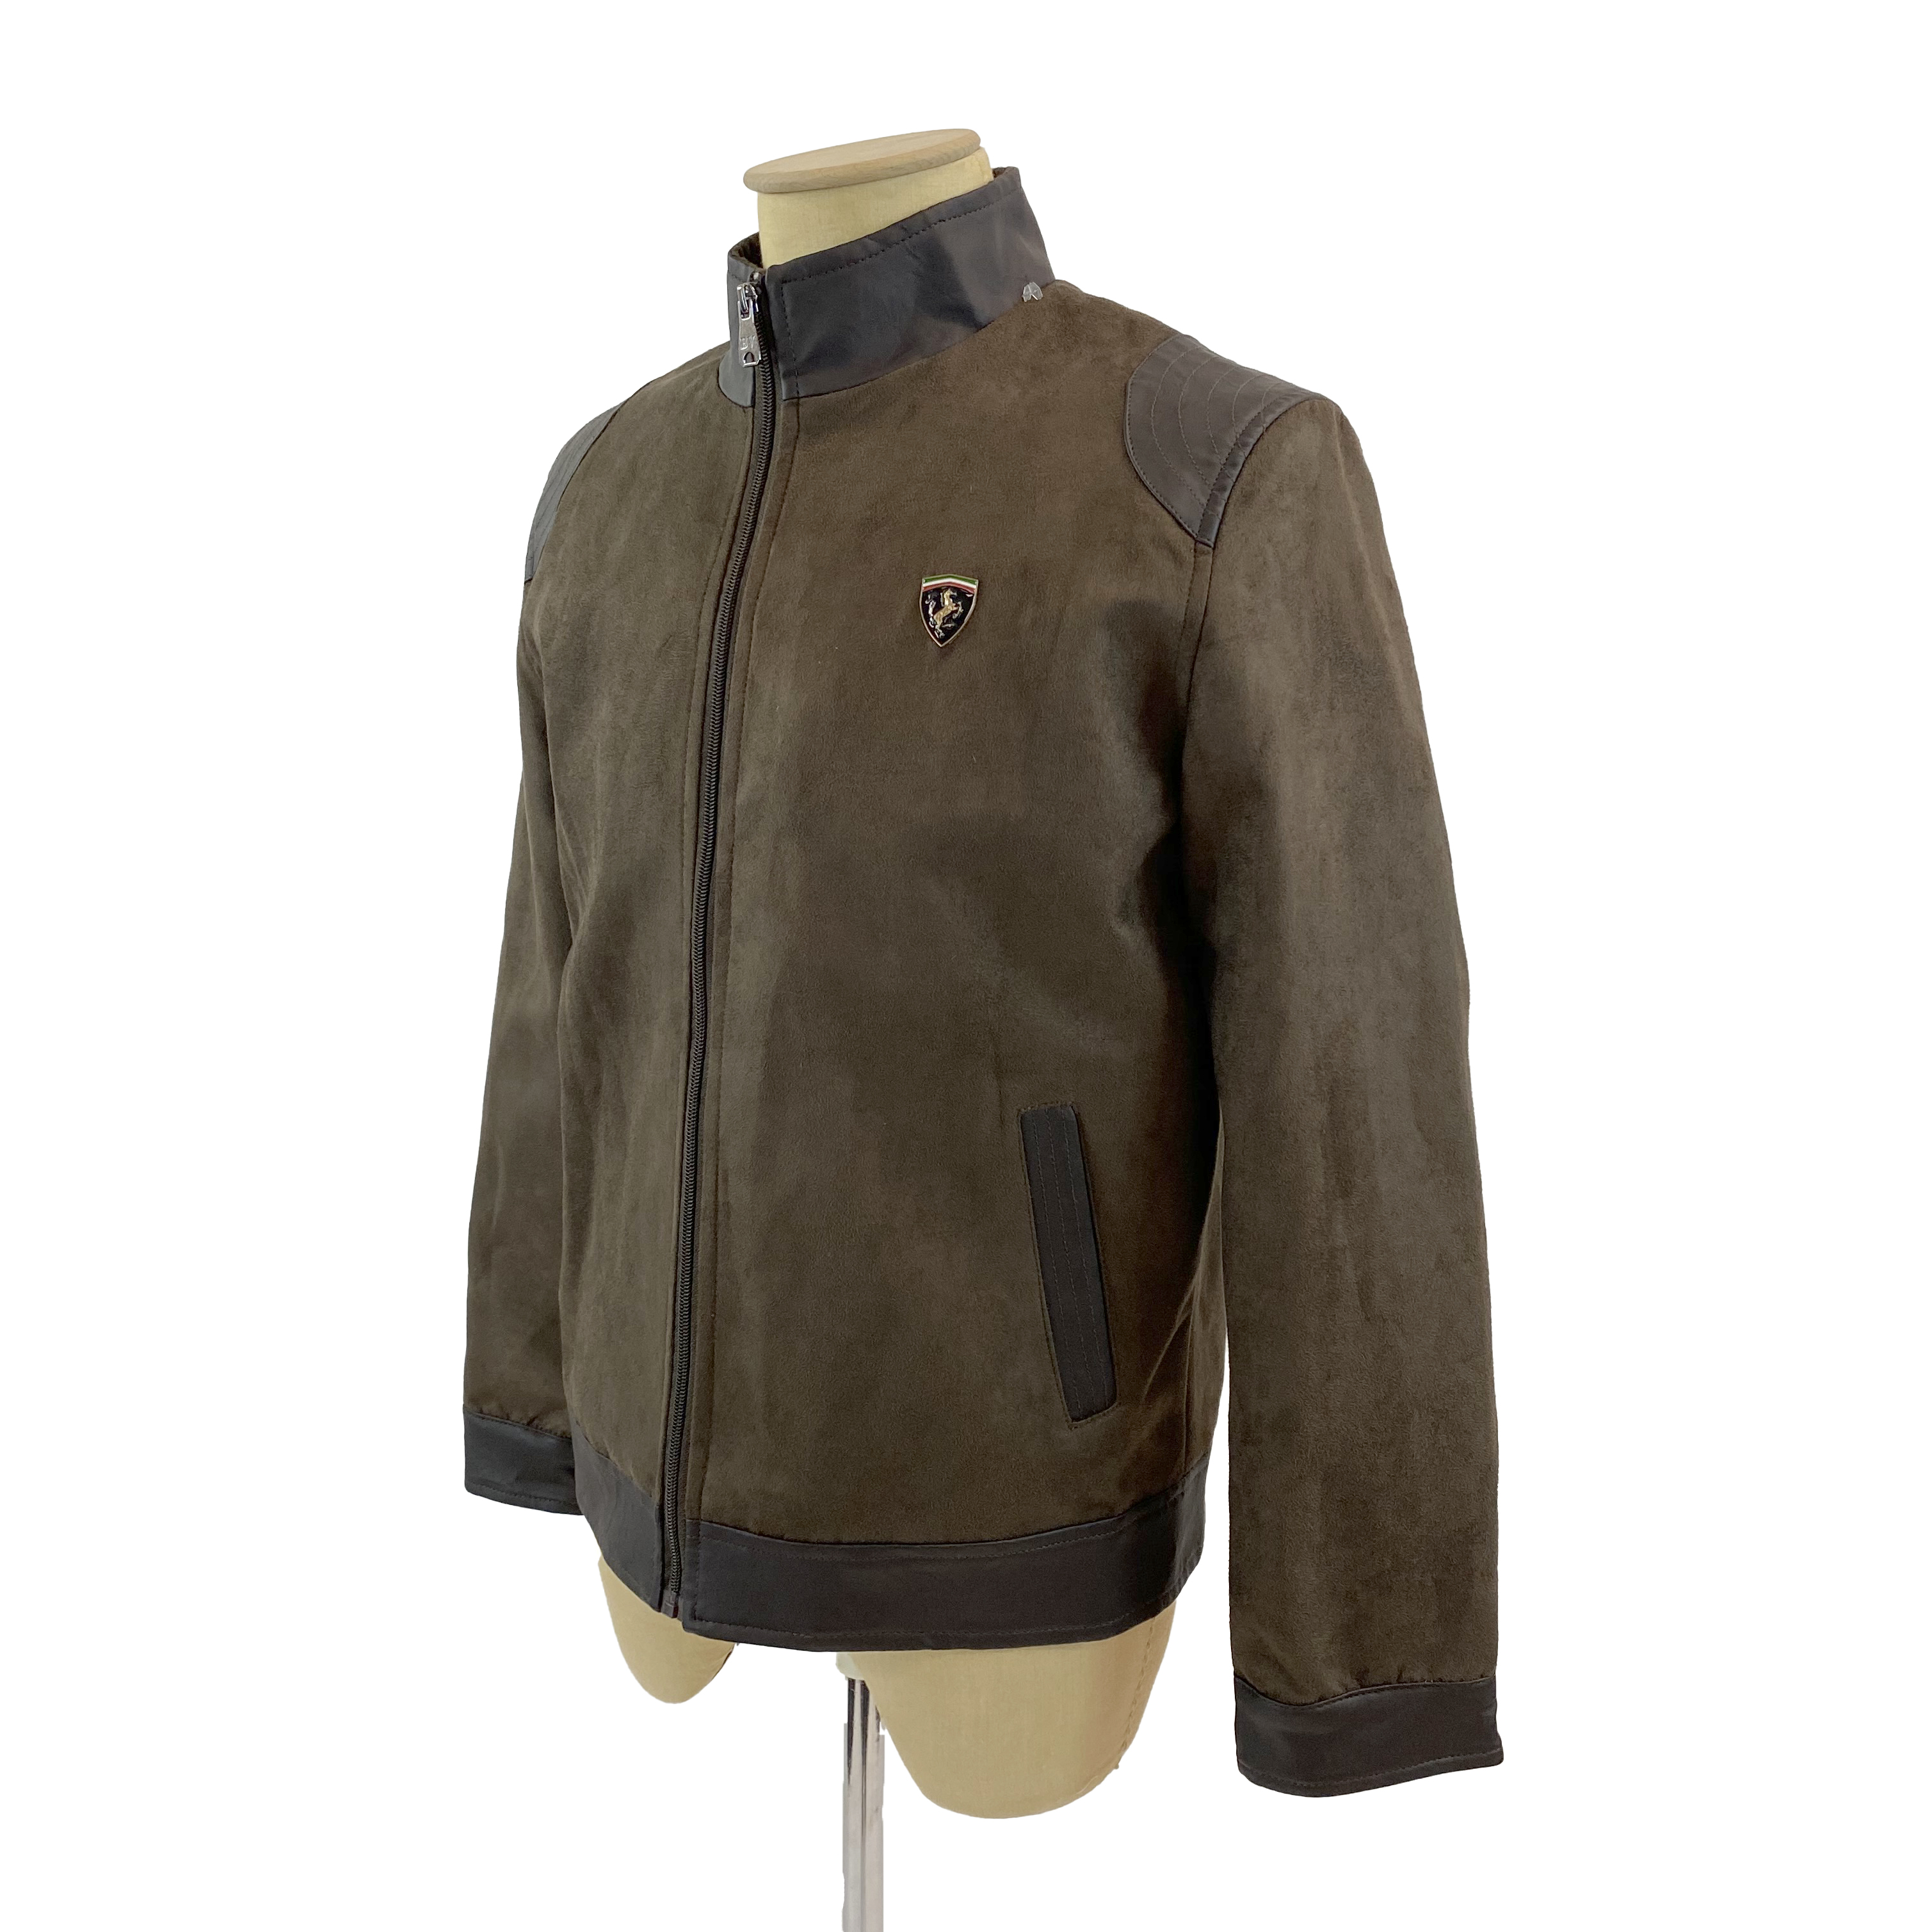 BV Chocolate Brown Suede/Leather Jacket Bomber-style Collar